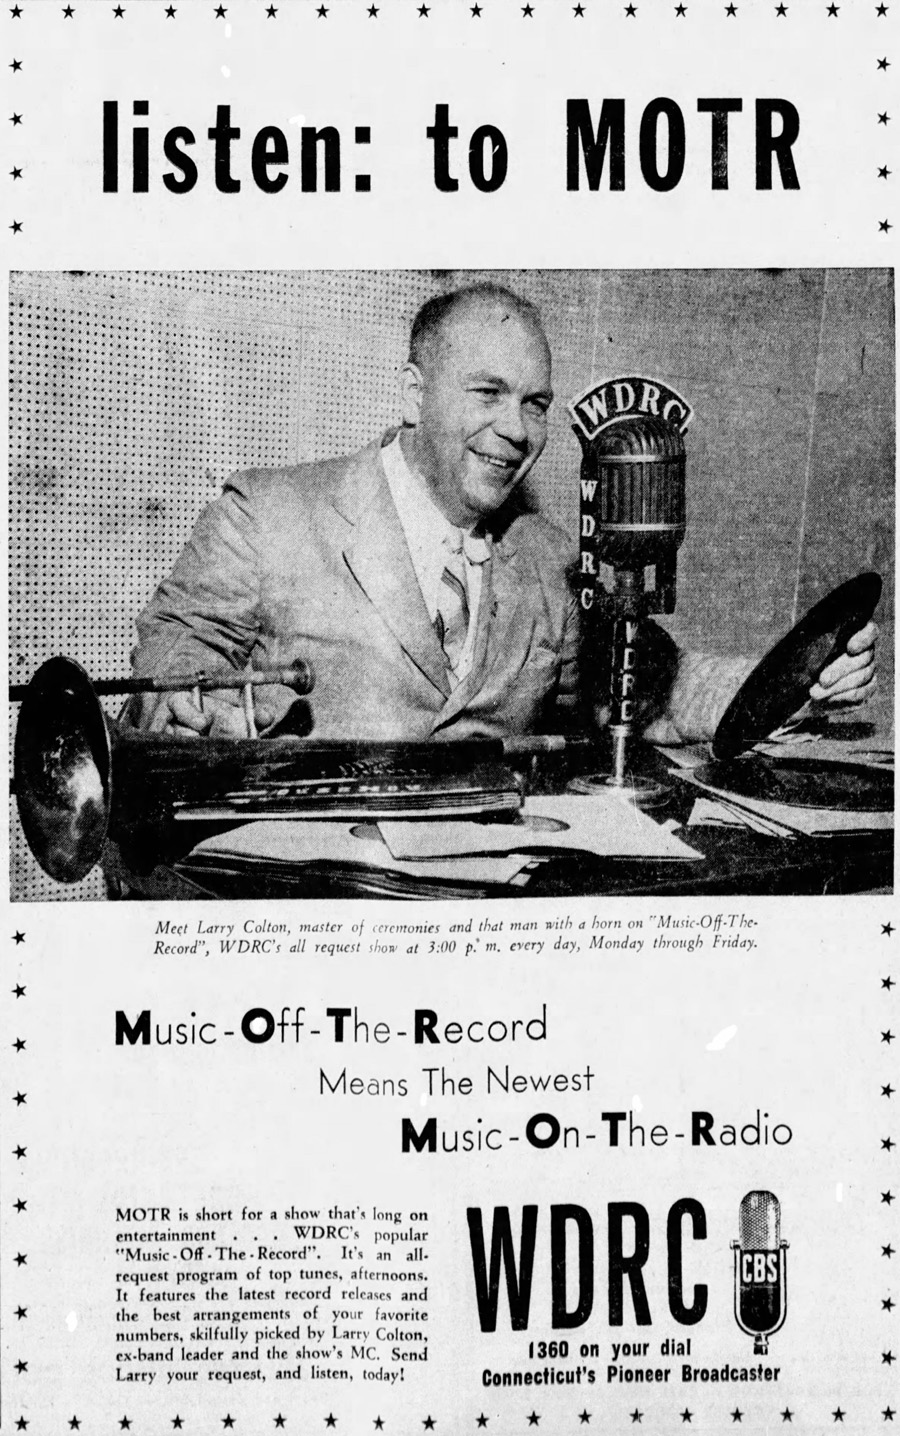 WDRC ad for Larry Colton and Music Off The Record - November  6, 1945